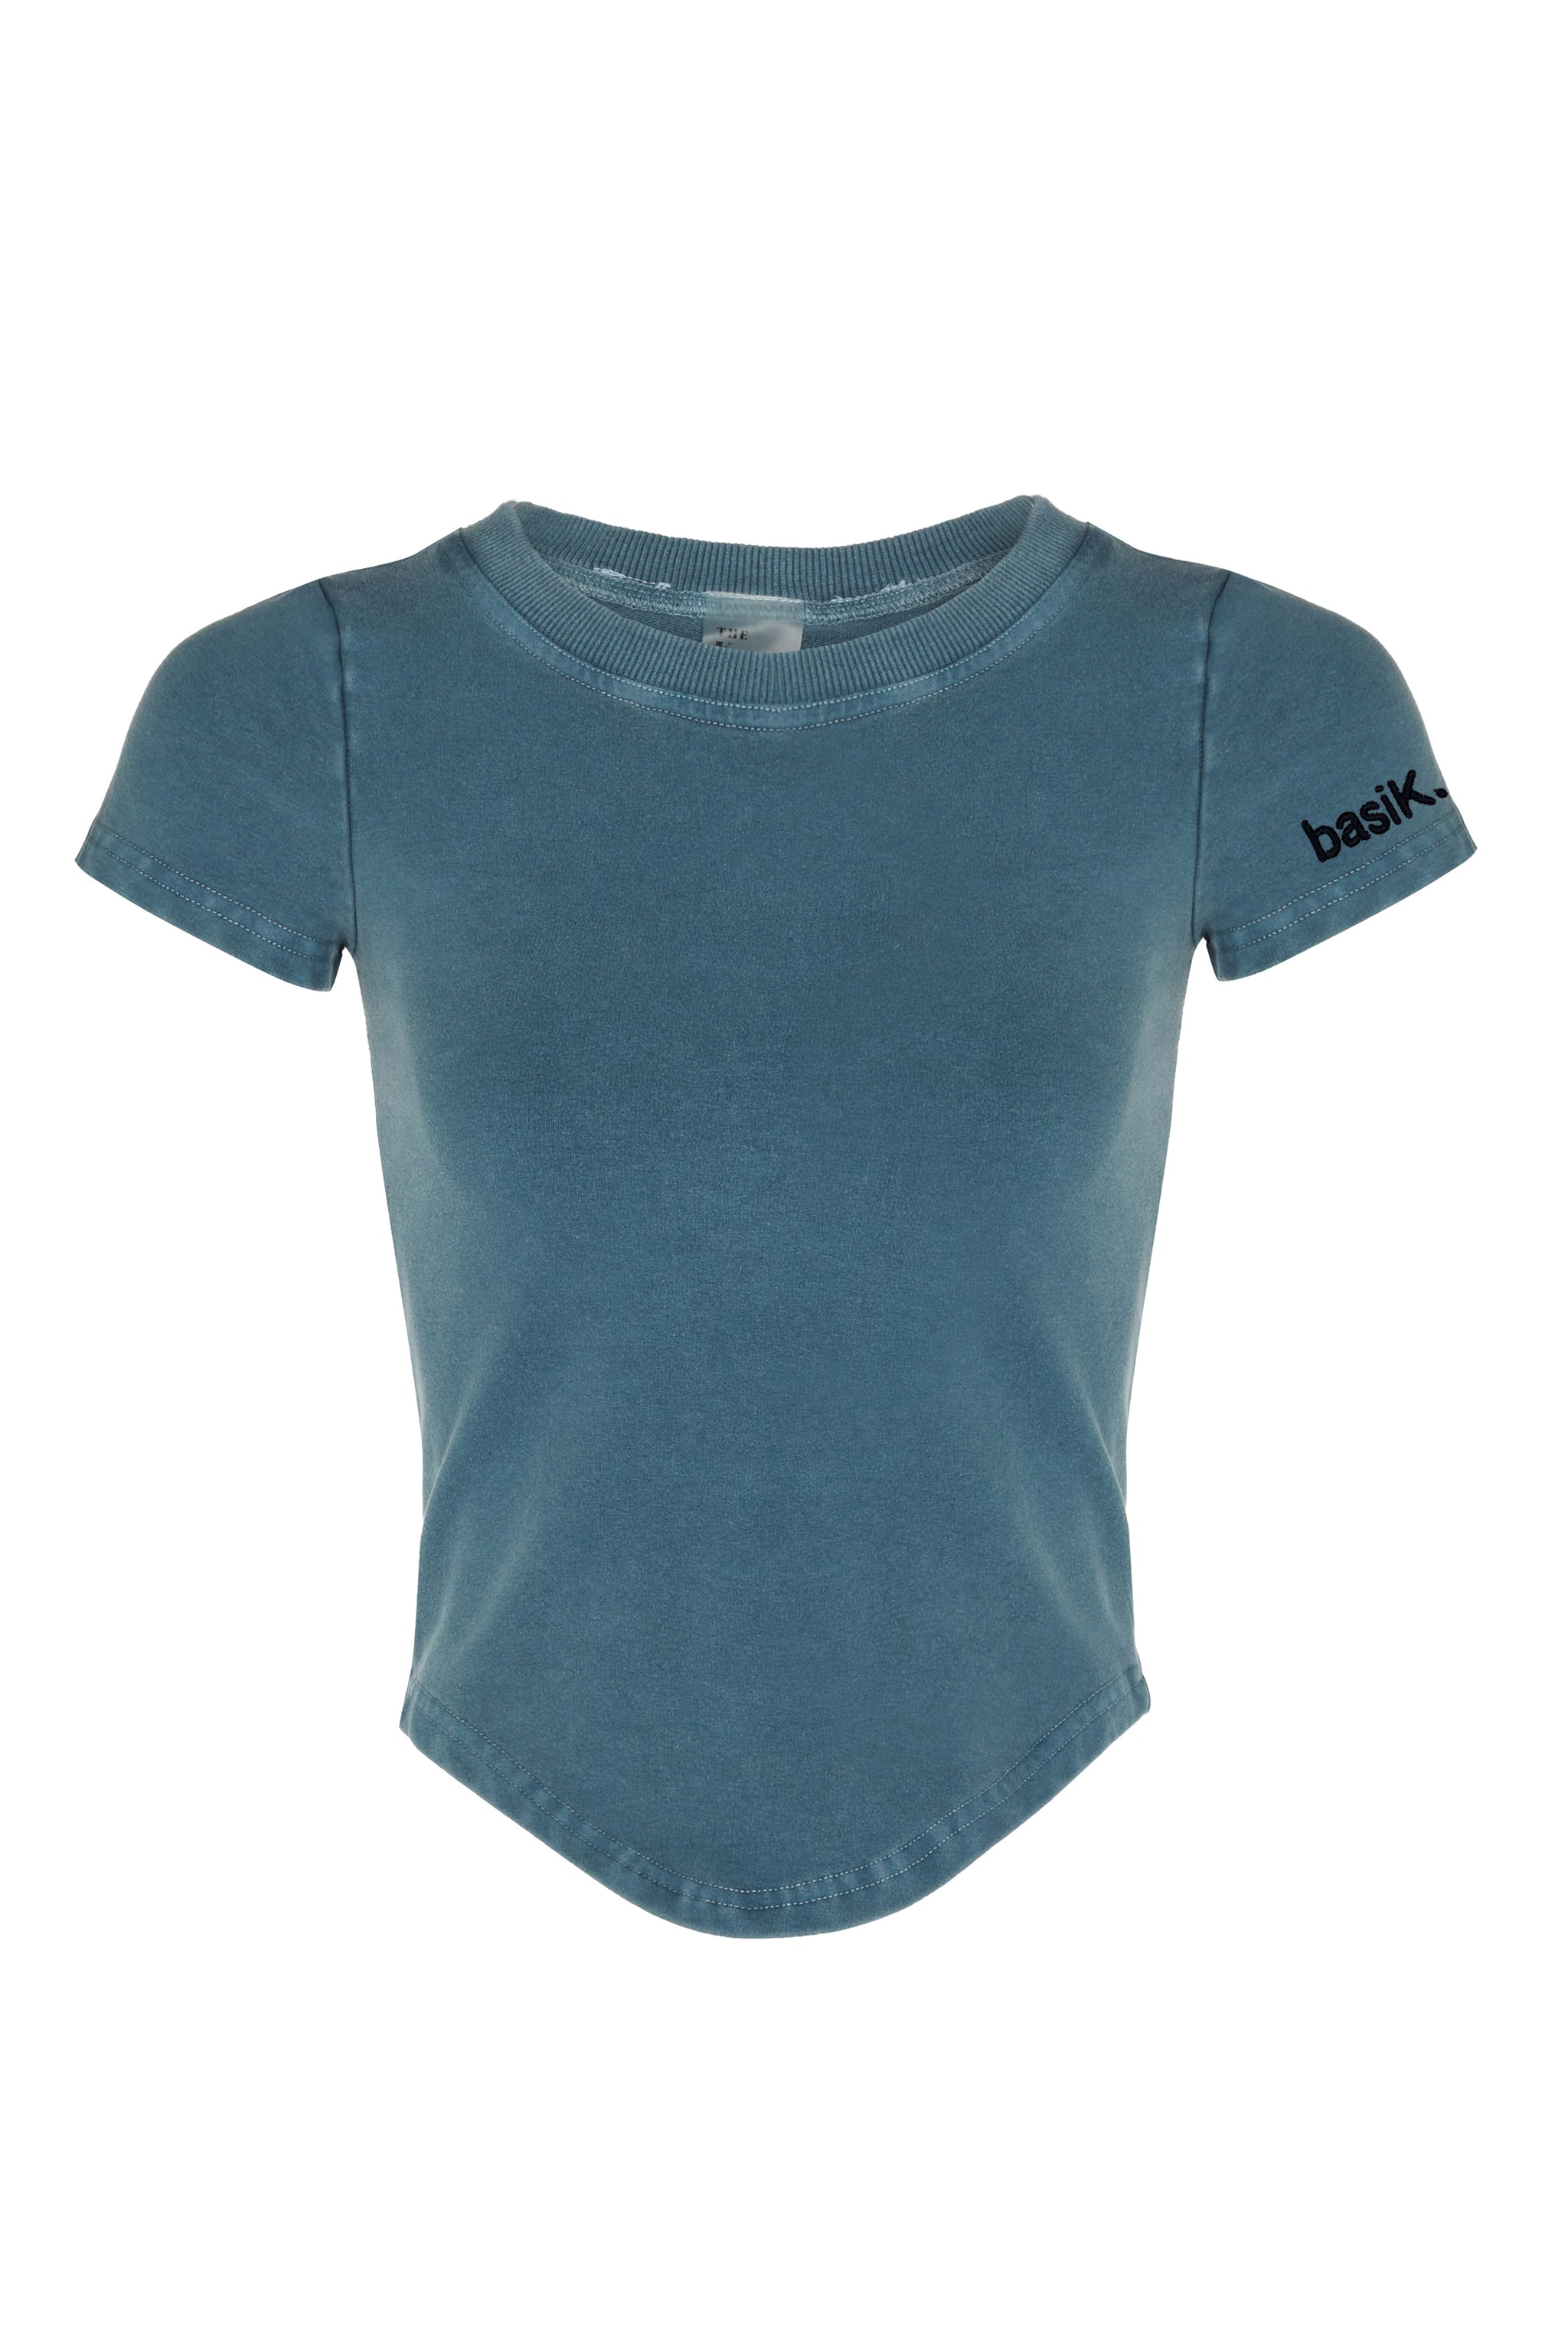 basiK• Corset Fitted T-Shirt in Petrol